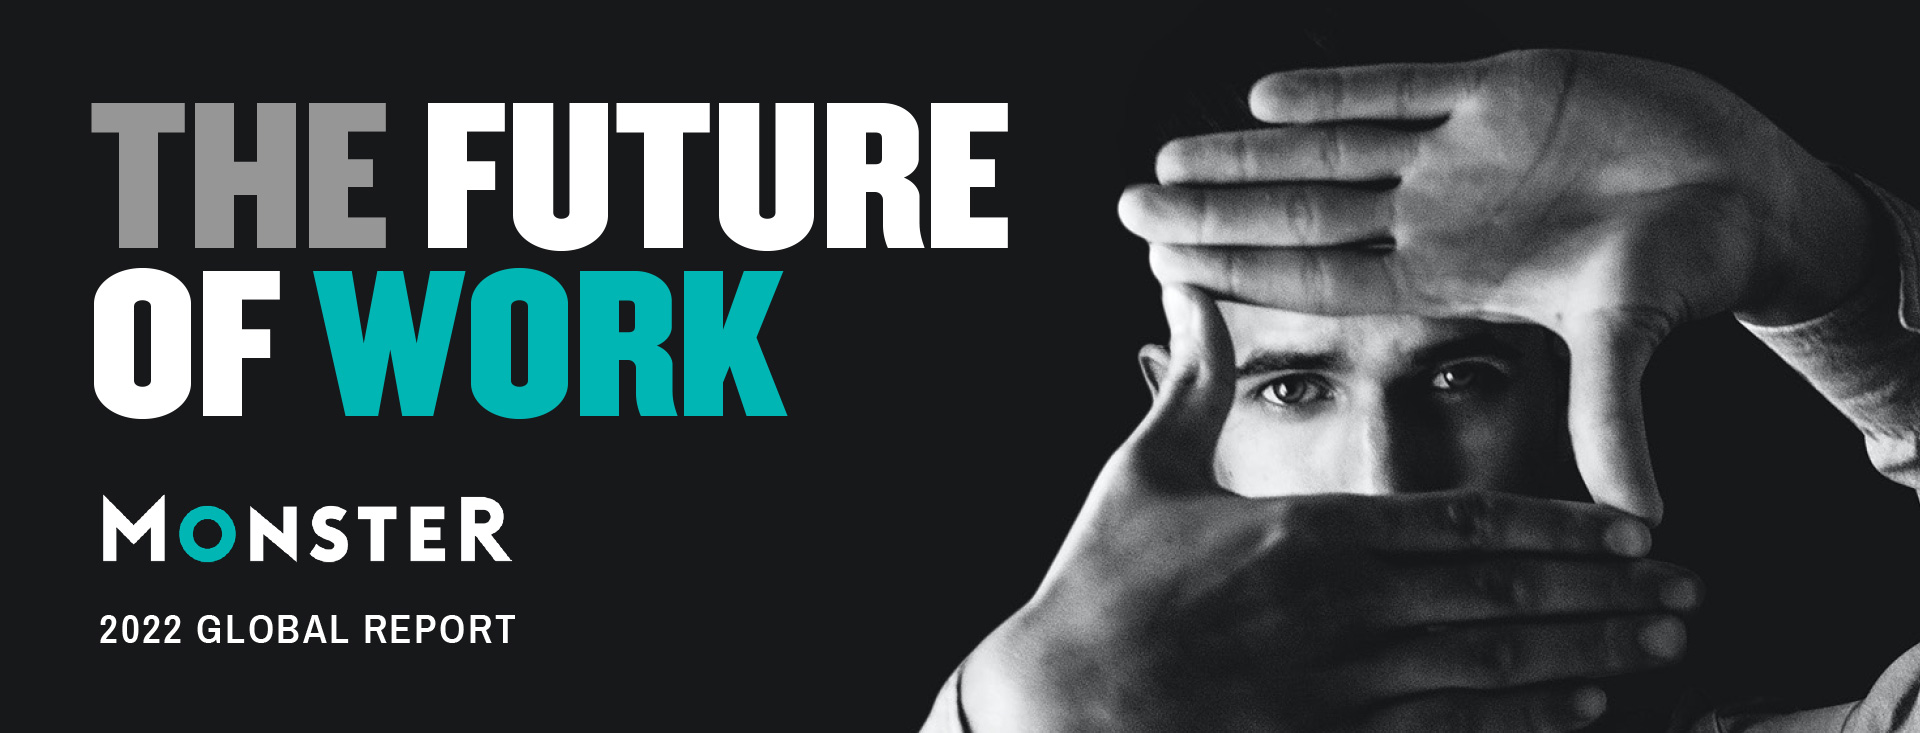 the future of work header1